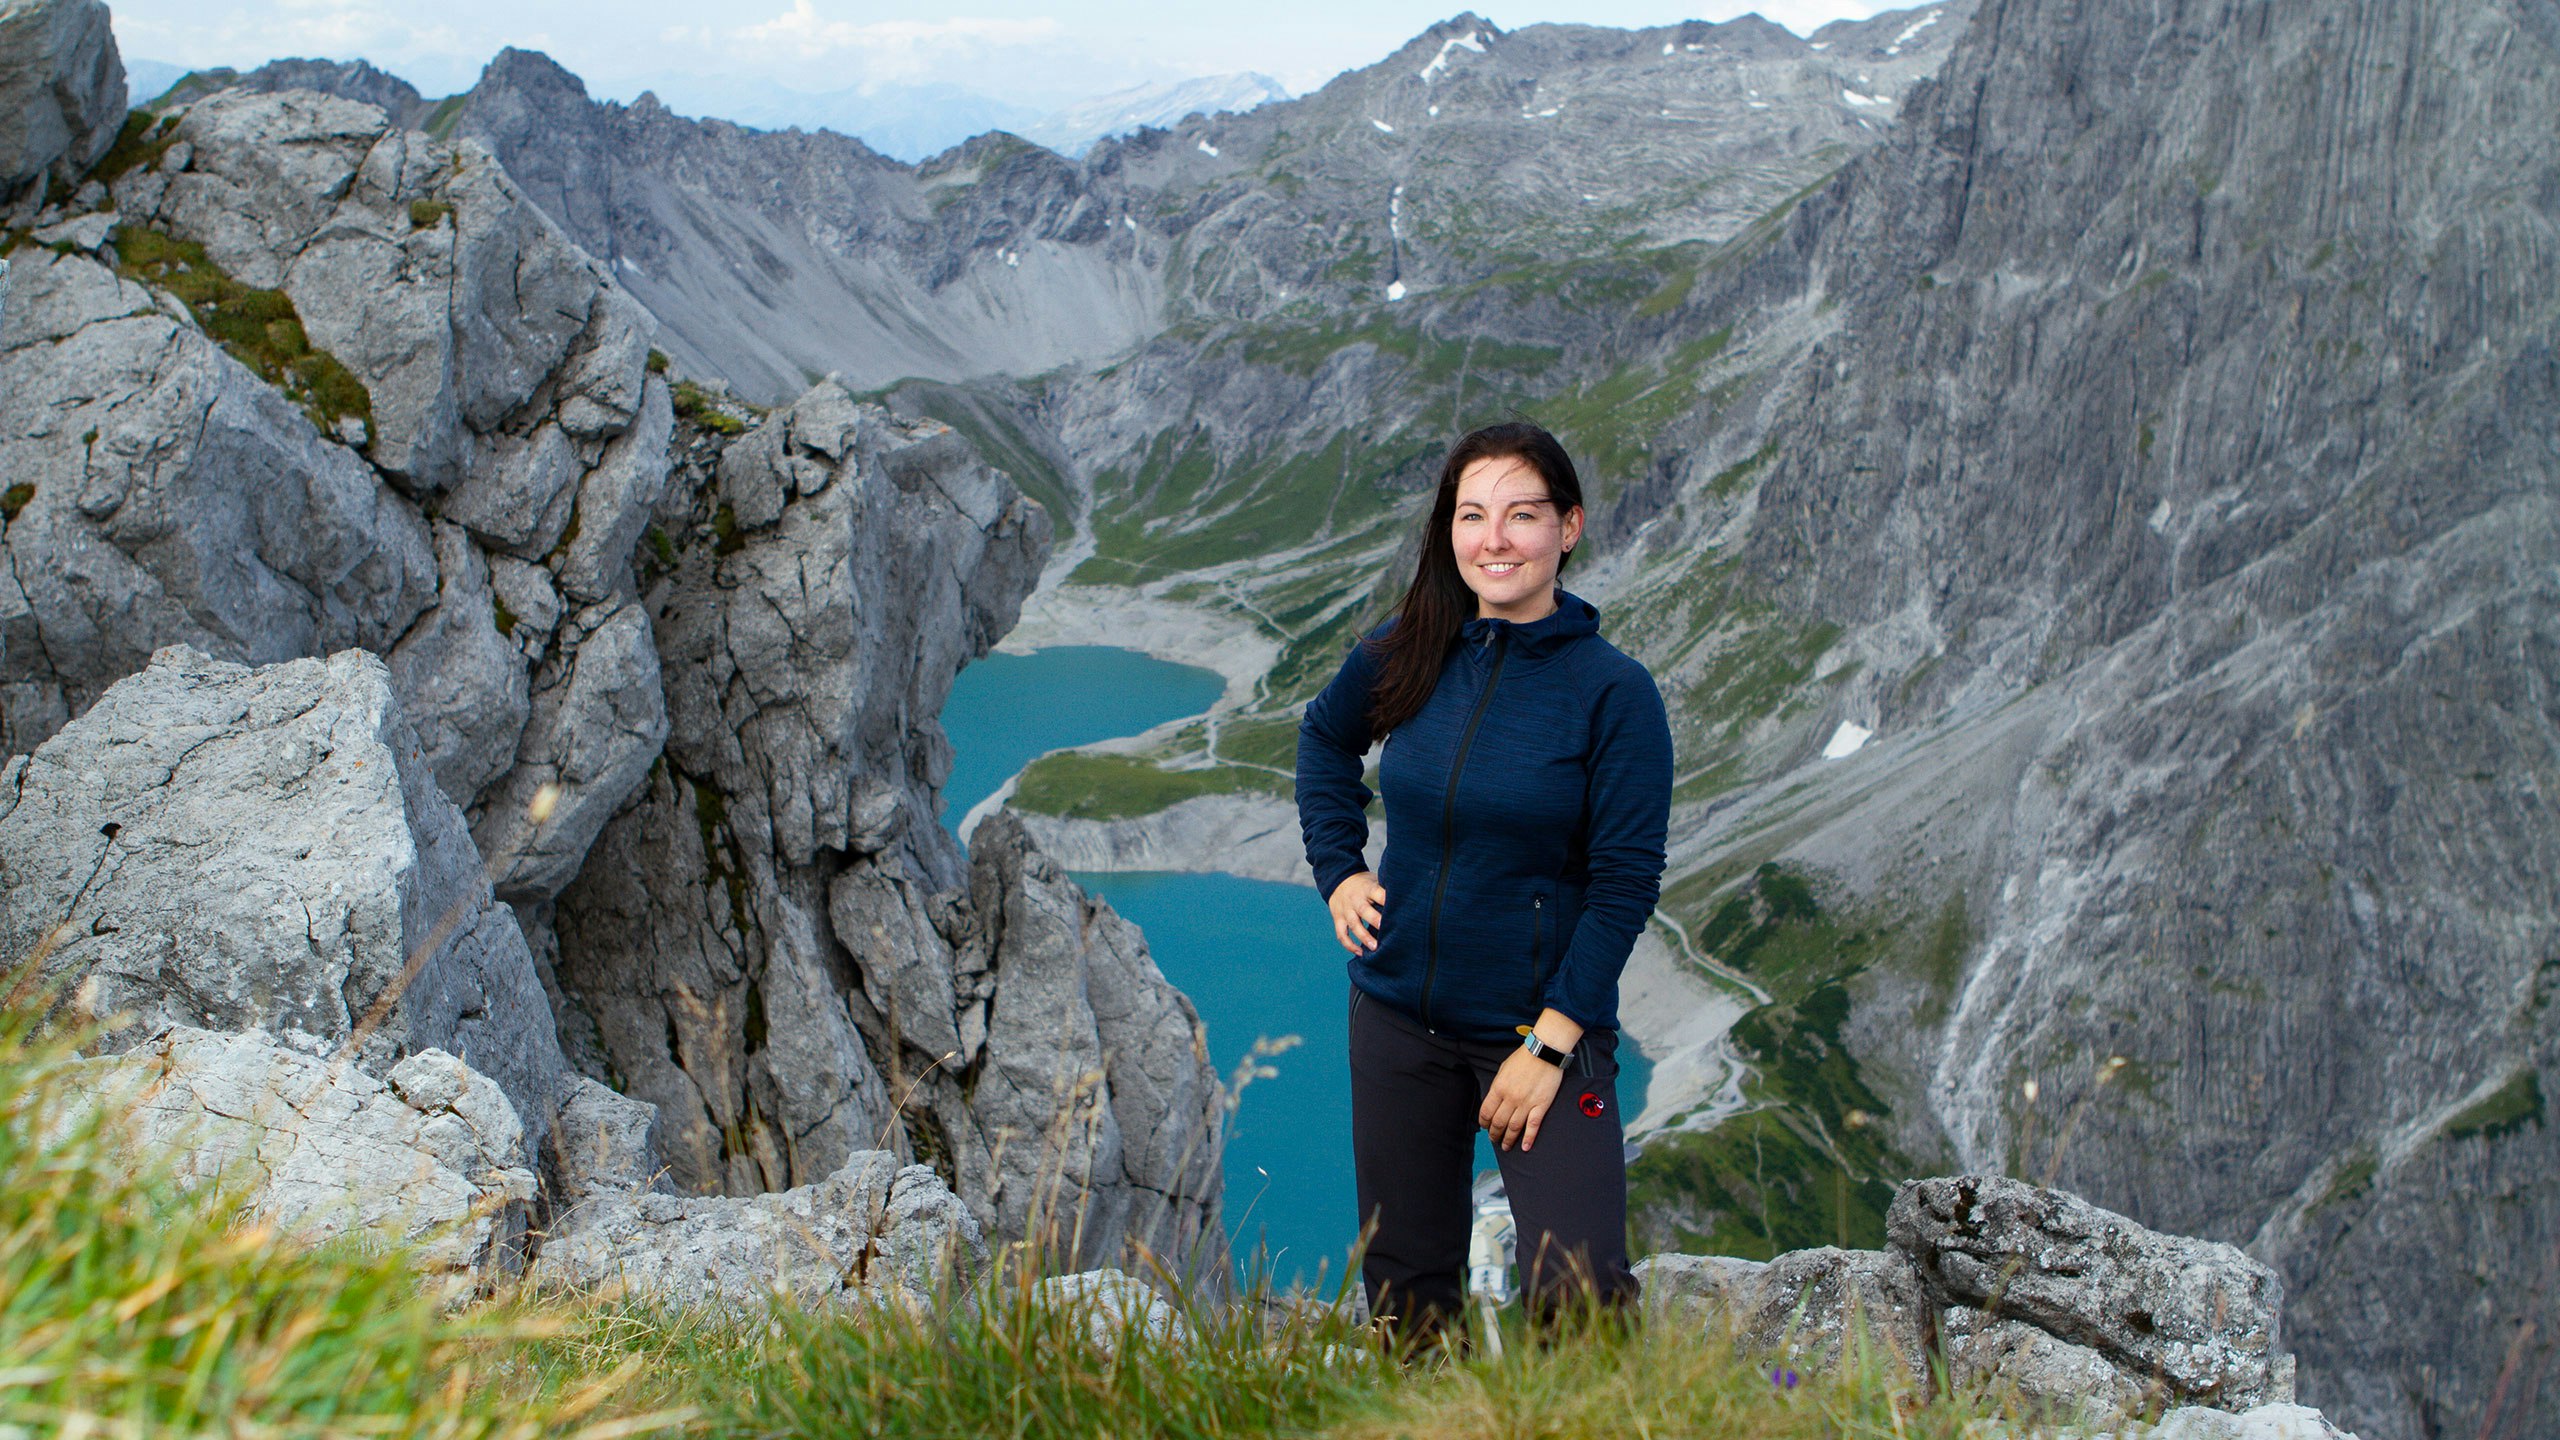 Bettina in front of a lake